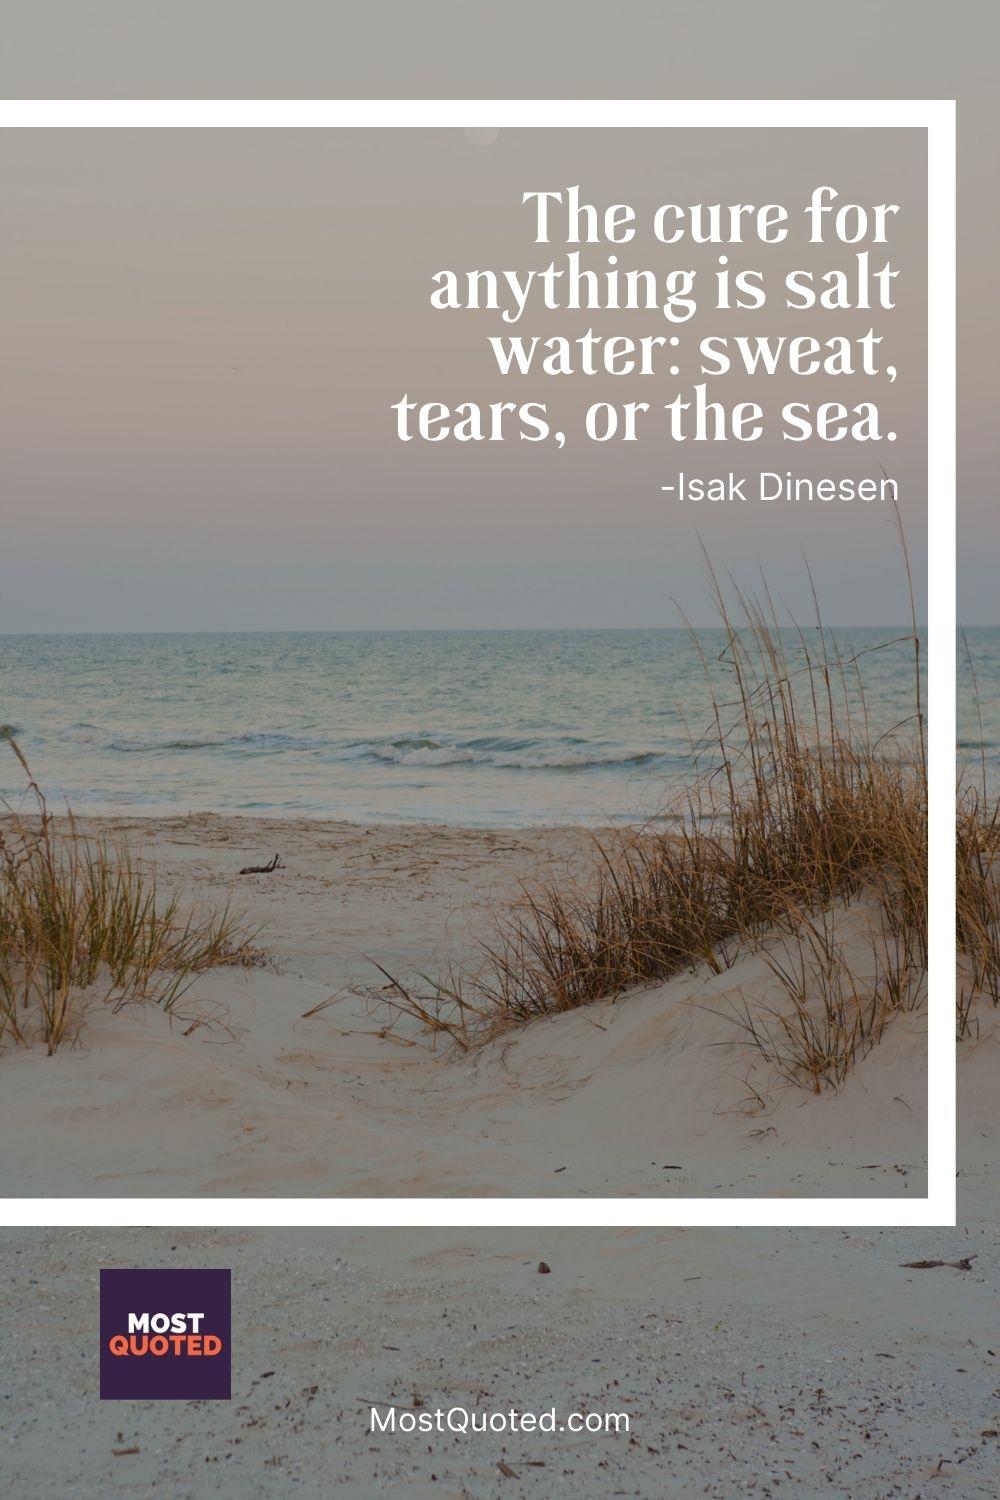 The cure for anything is salt water: sweat, tears, or the sea. - Isak Dinesen